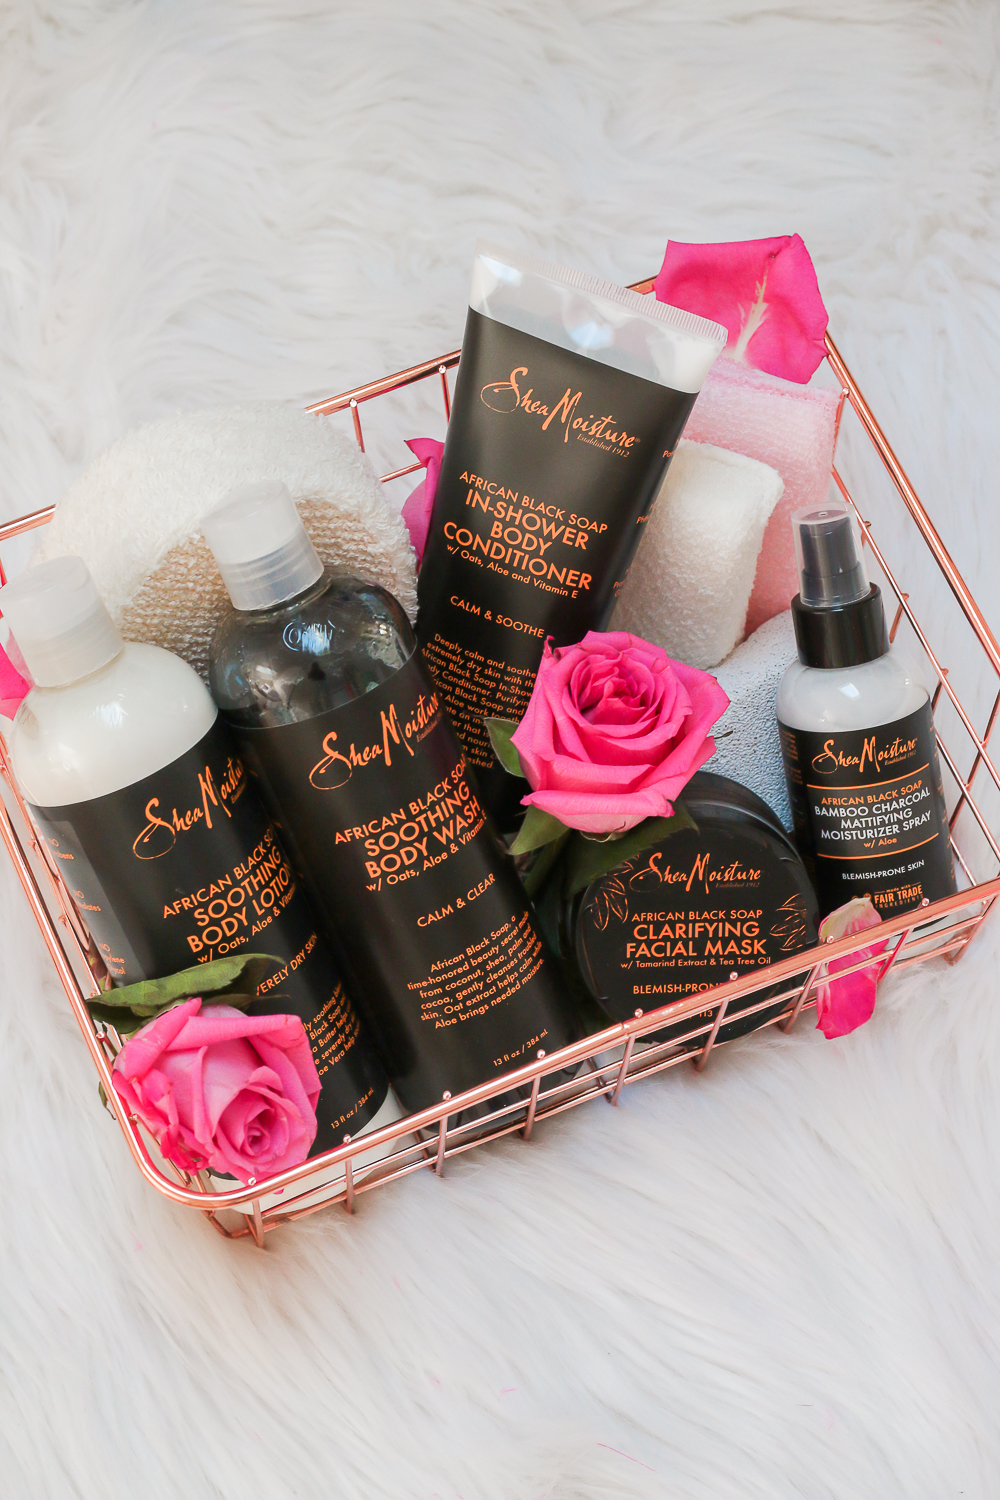 How to Give Yourself a Soothing Spa Experience at Home with the SheaMoisture African Black Soap Line by beauty blogger Stephanie Ziajka from Diary of a Debutante, At Home Spa Day Essentials from Walmart, Winter Skincare Tips for Oily Skin, Body Skincare Routine, Skin Care Products for Oily Skin in Winter, At Home Spay Day Kit, DIY Spa Day at Home